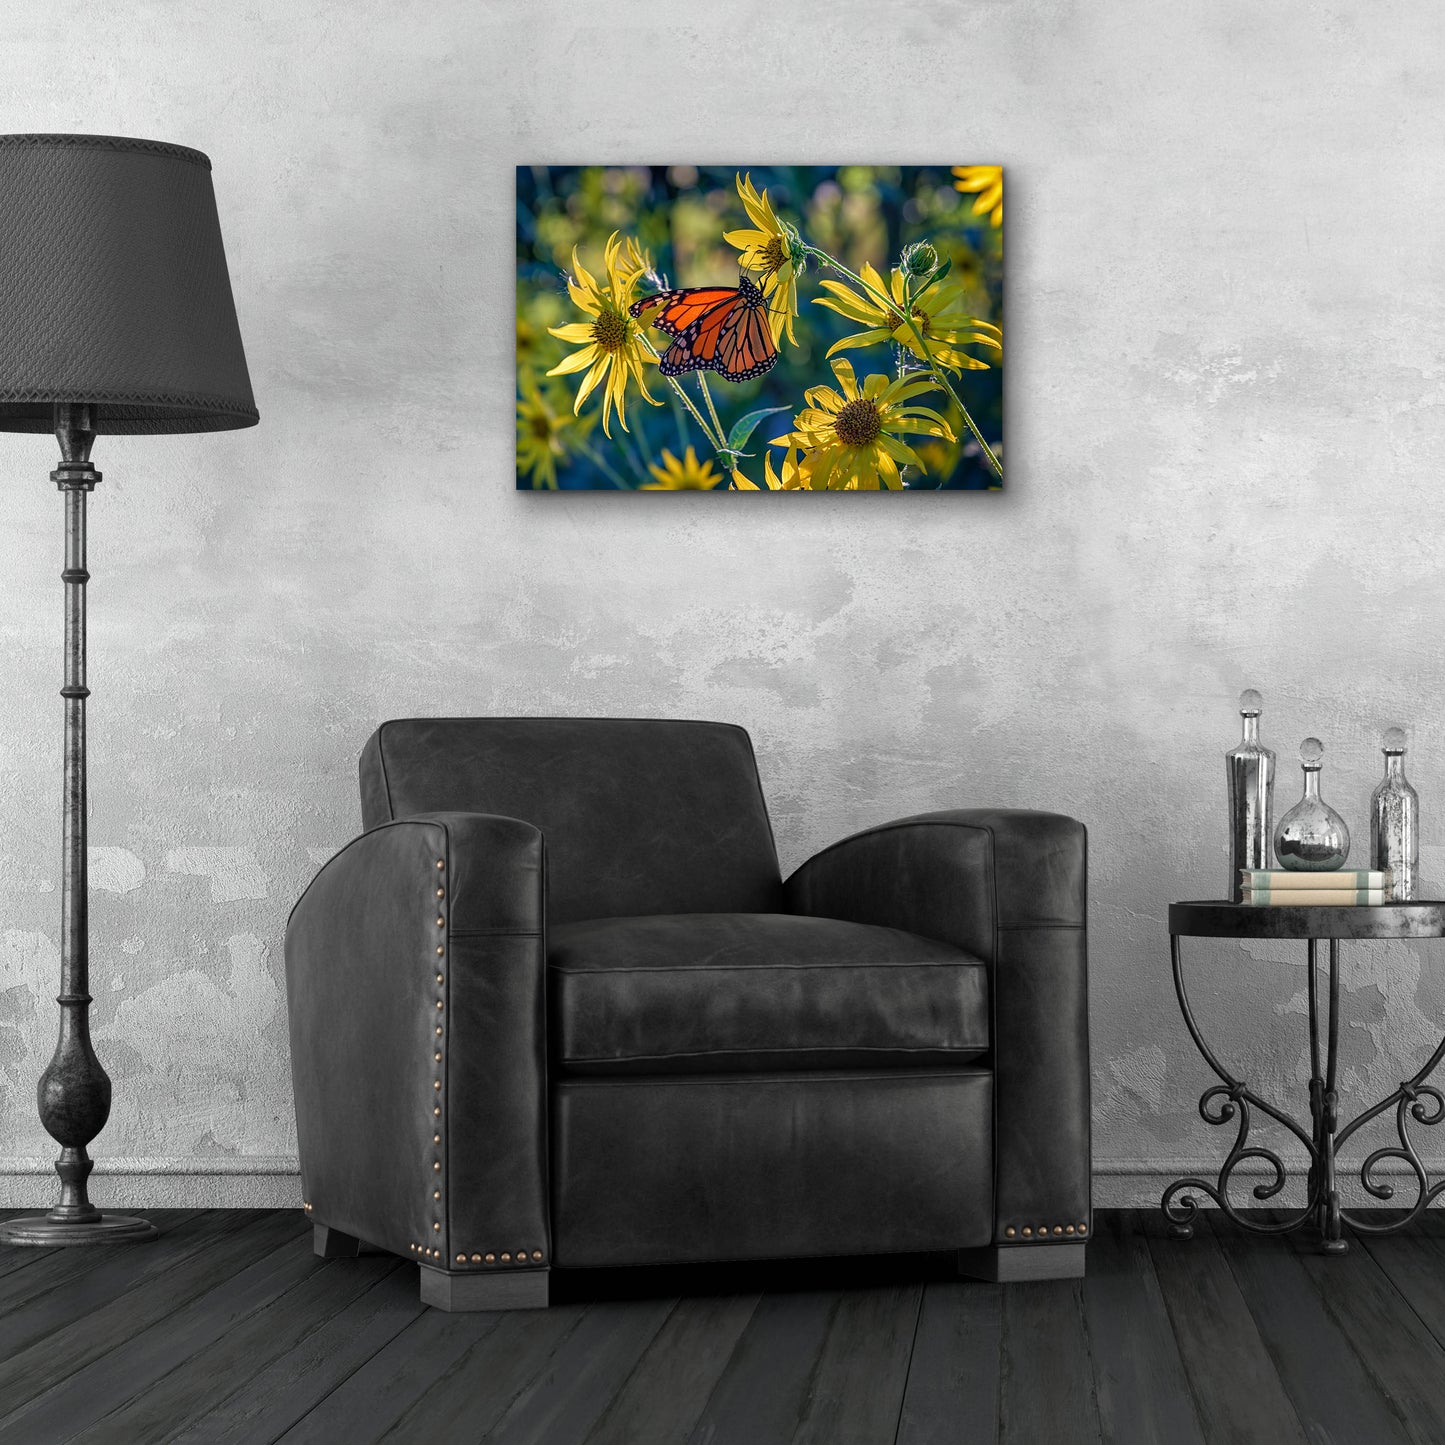 Epic Art 'The Monarch and the Sunflower' by Rick Berk, Acrylic Glass Wall Art,24x16